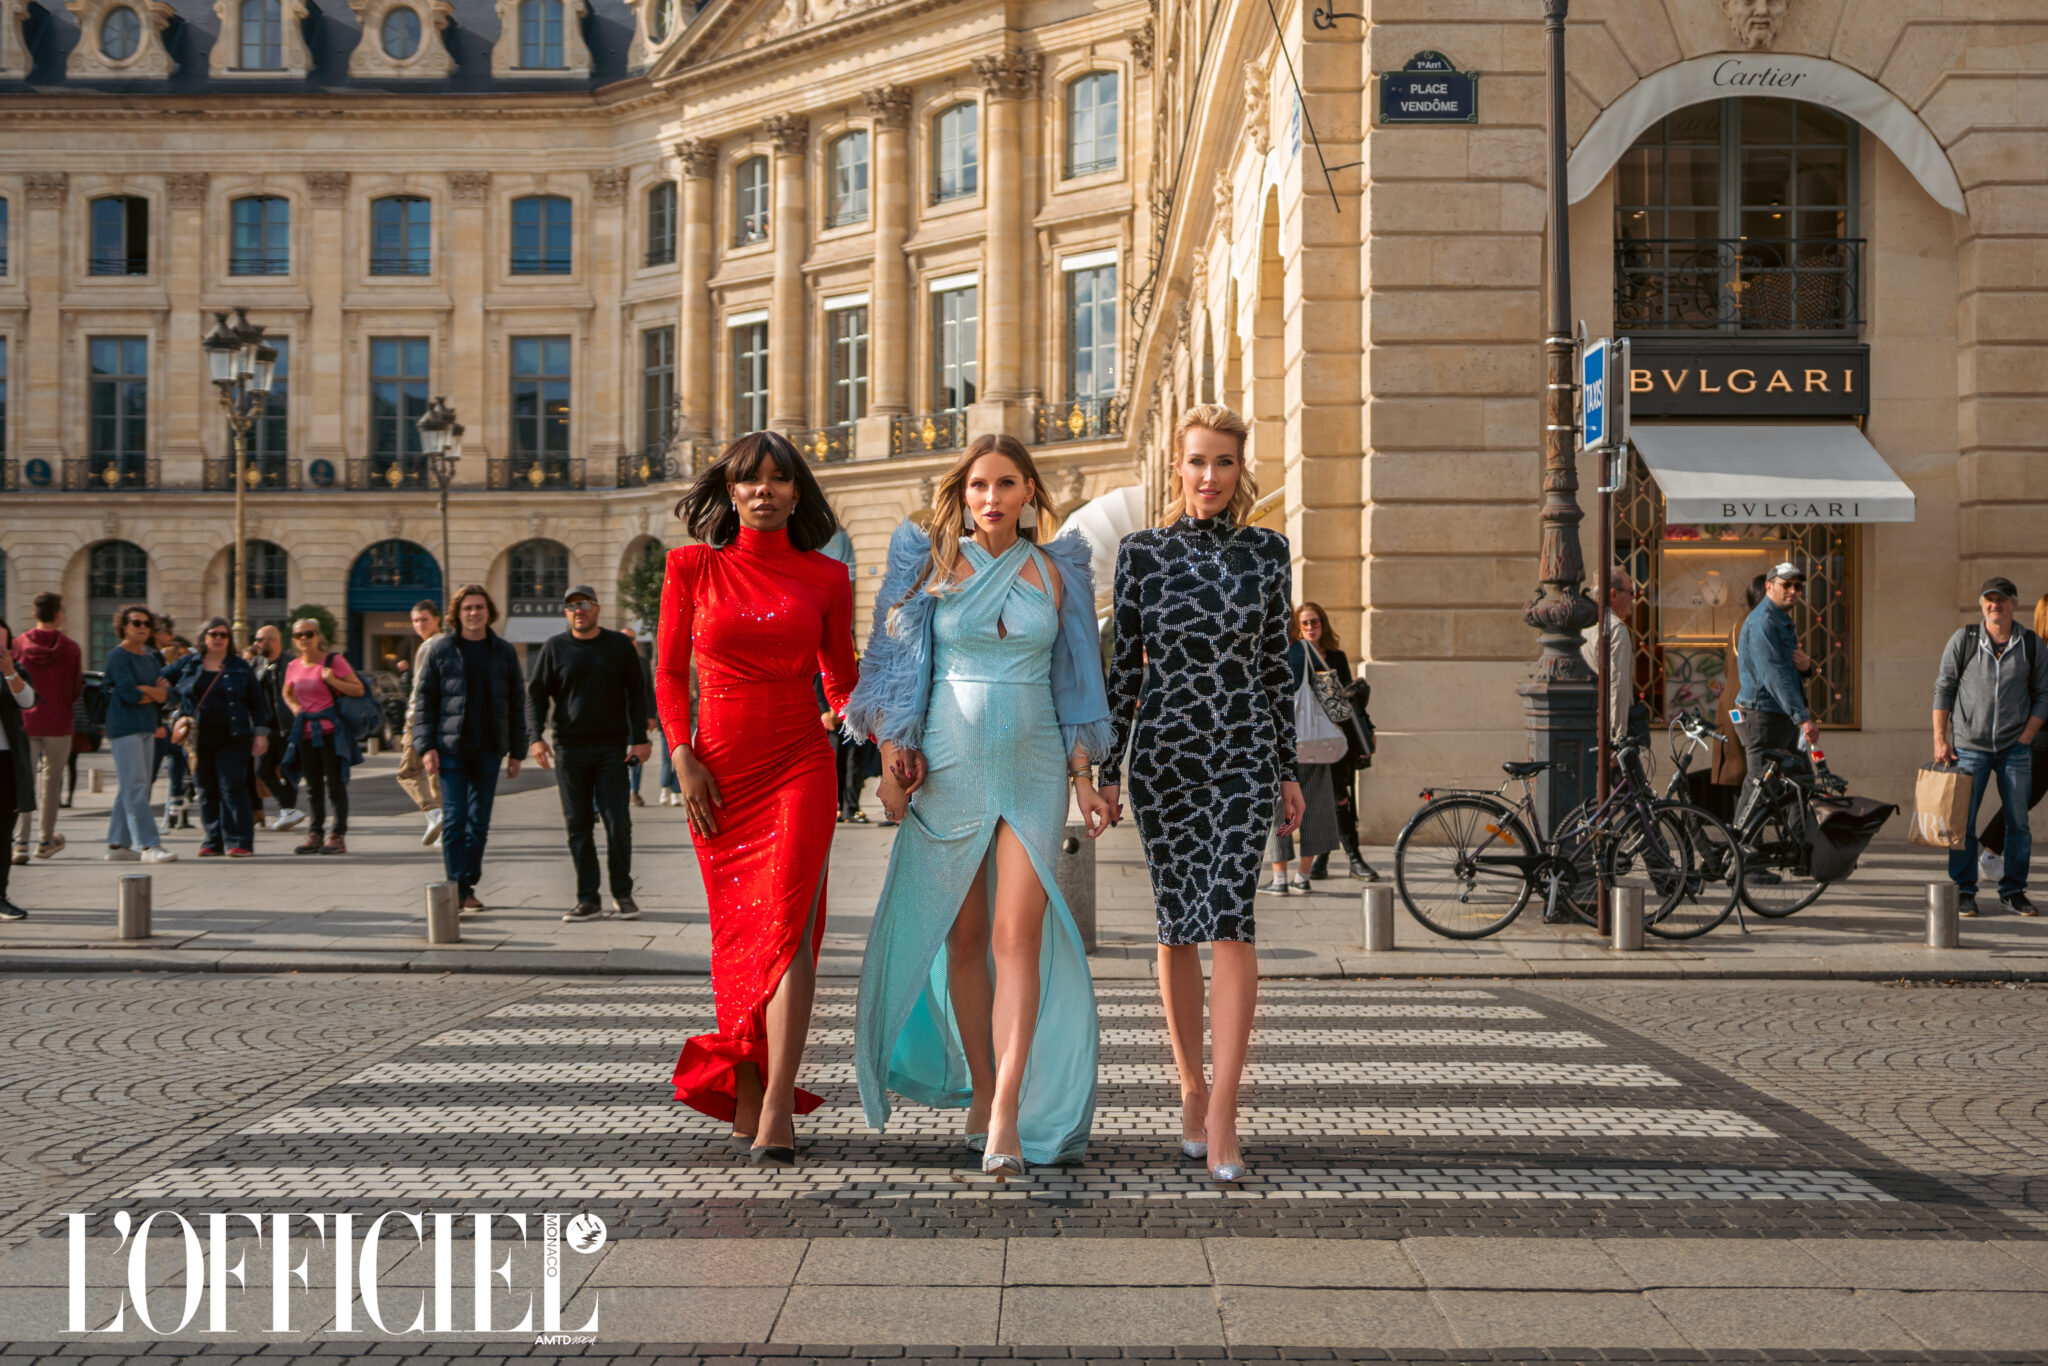 Feature at L'Officiel Monaco during Paris Fashion Week SS 23. Visual Fashion Story from the magical Paris. Featuring: Nicolas Besson, Gemy Maalouf, Charriol, Sol Angelann and more. 13